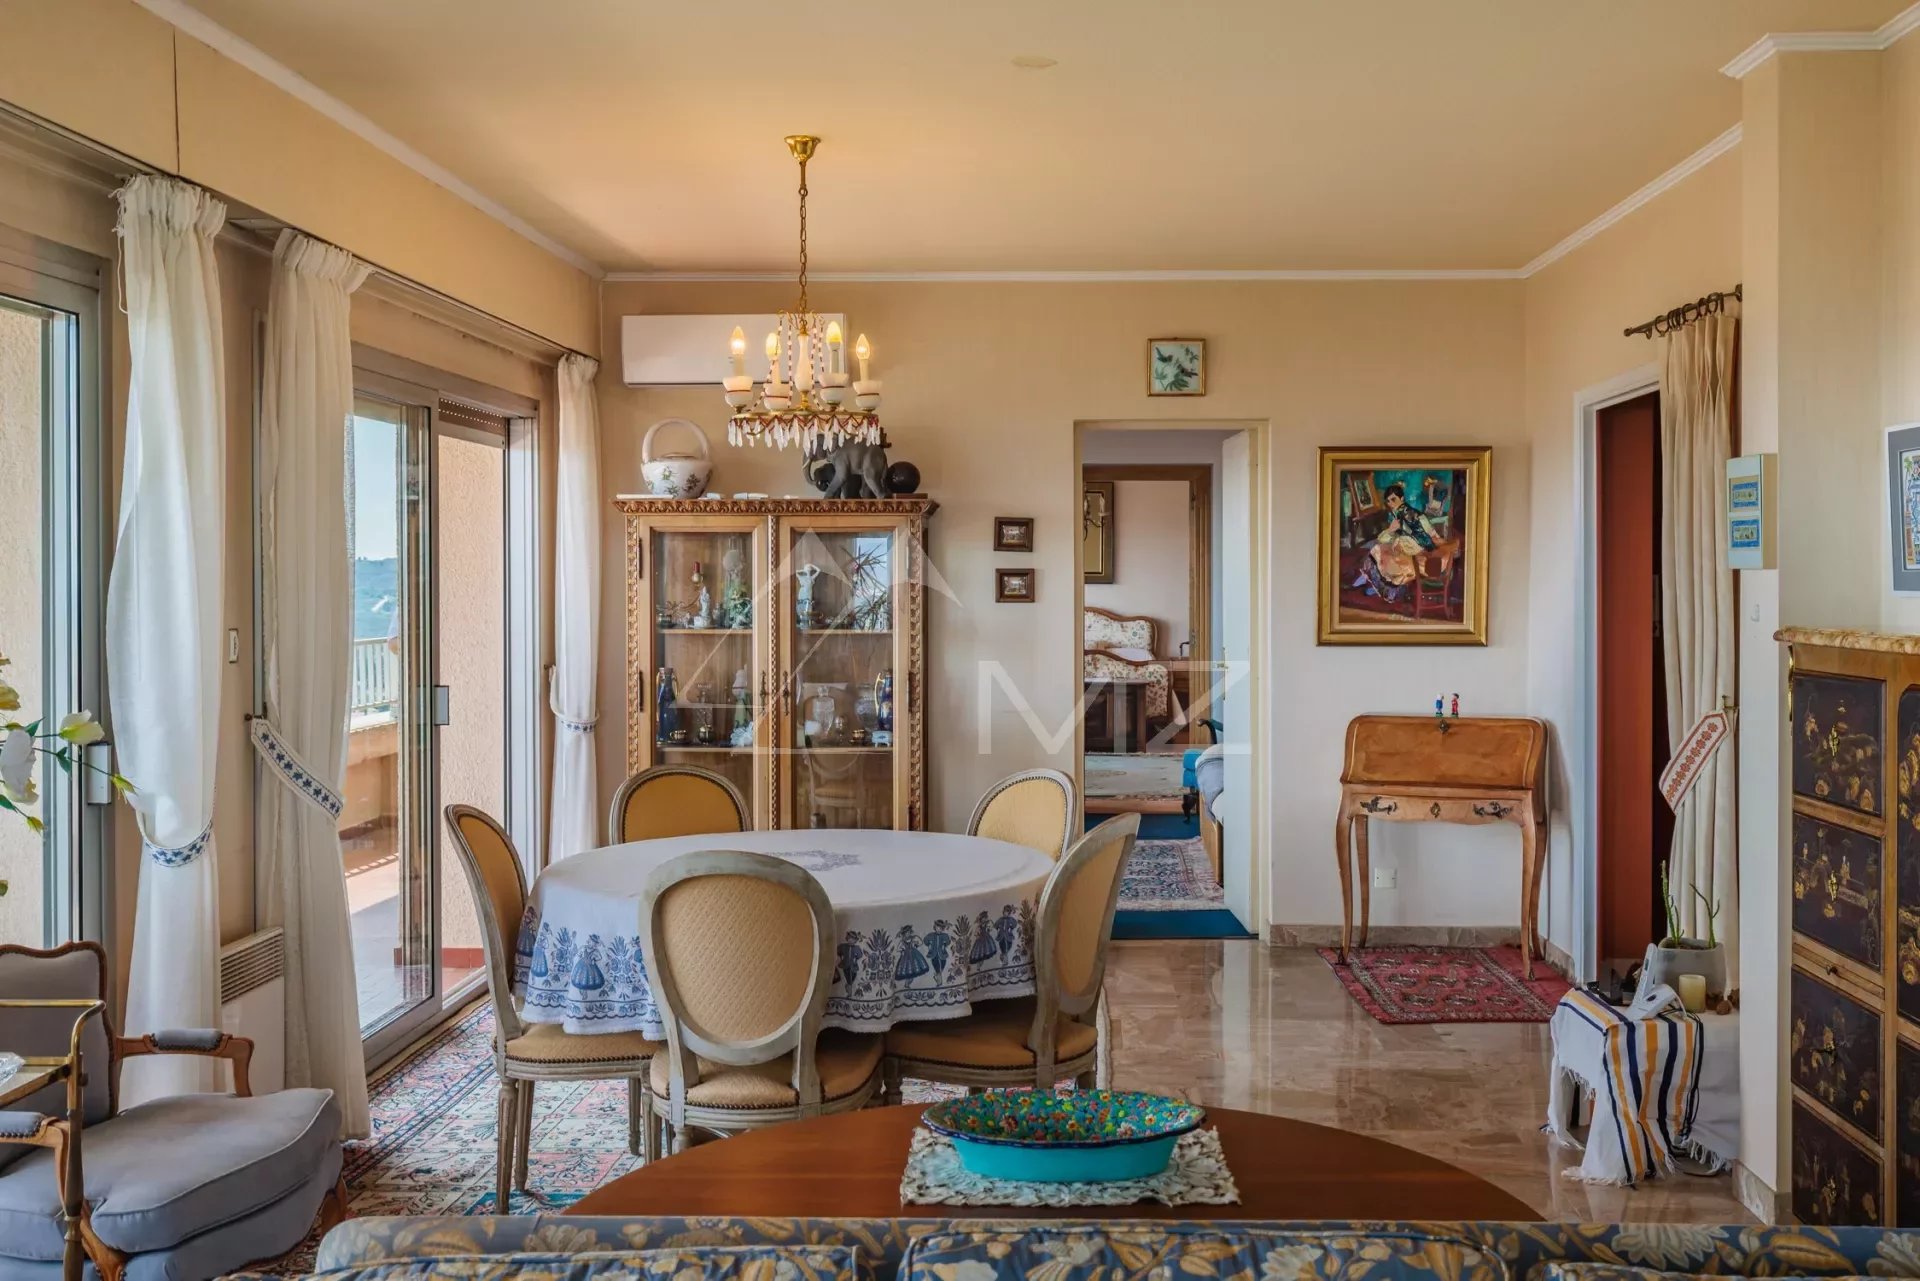 Flat with terrace and panoramic view near Avignon